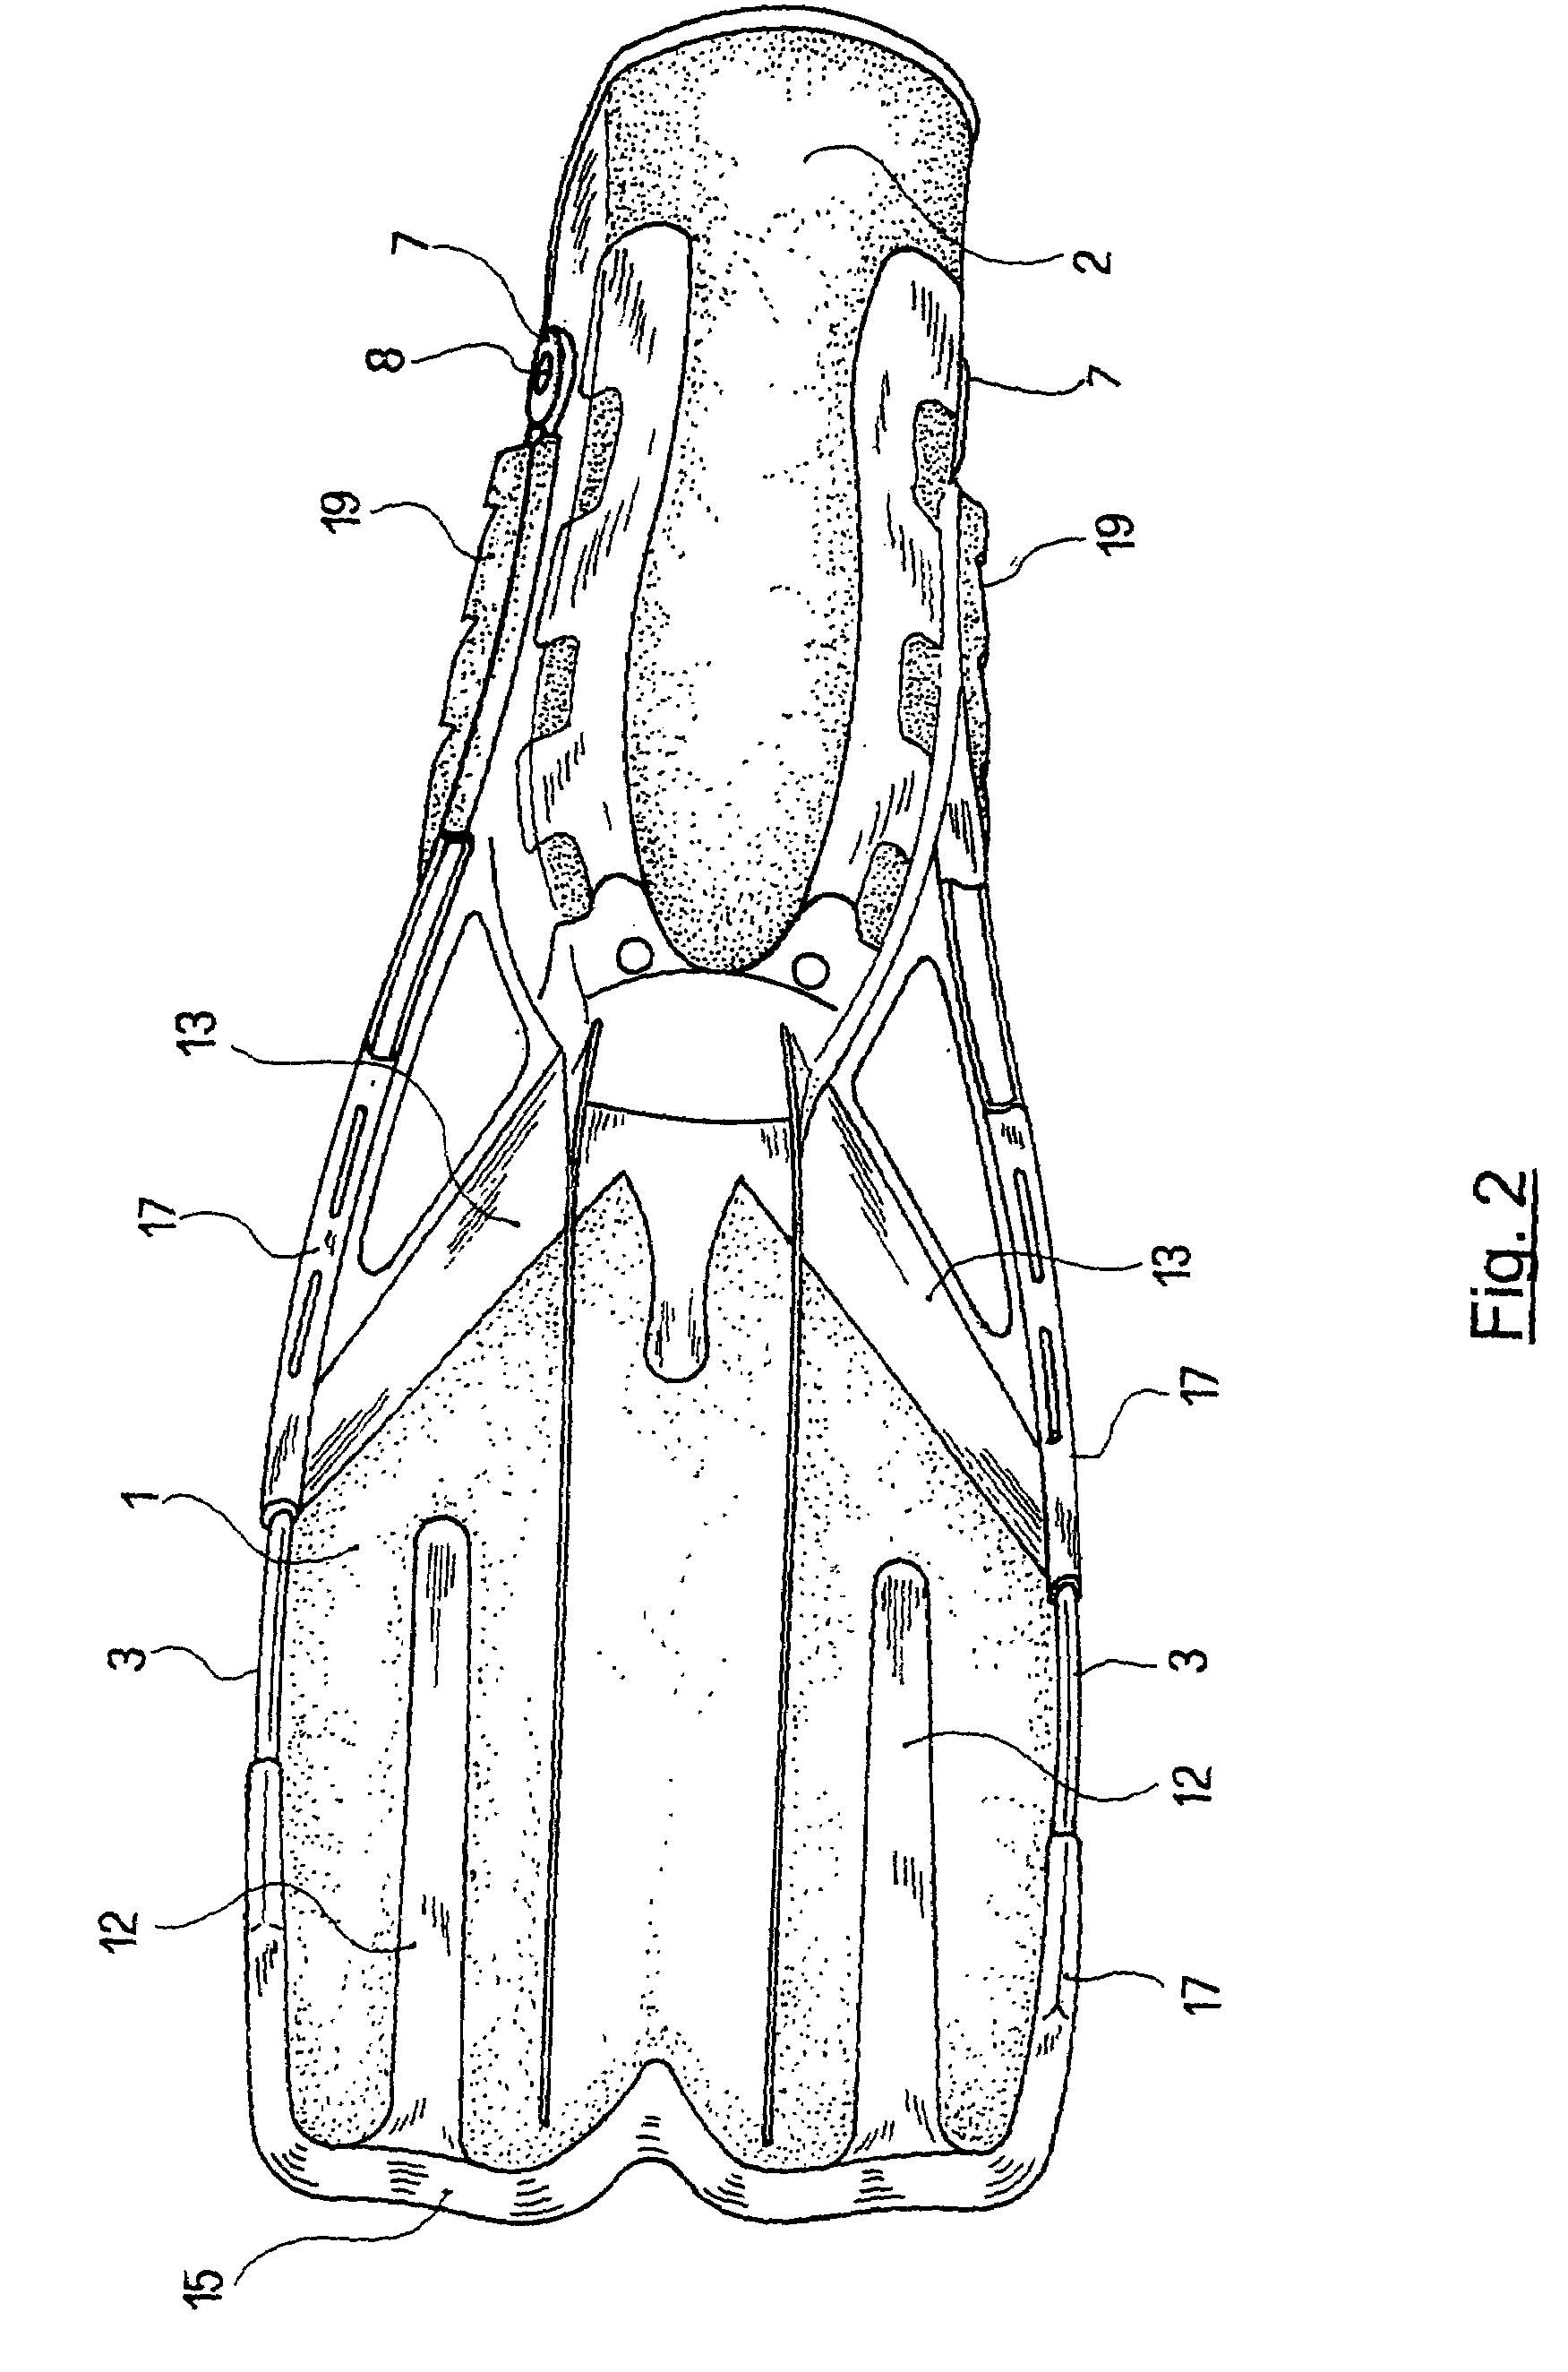 Differentiated rigidity swimming fin with hydrodynamically designed rearward shoe strap connection